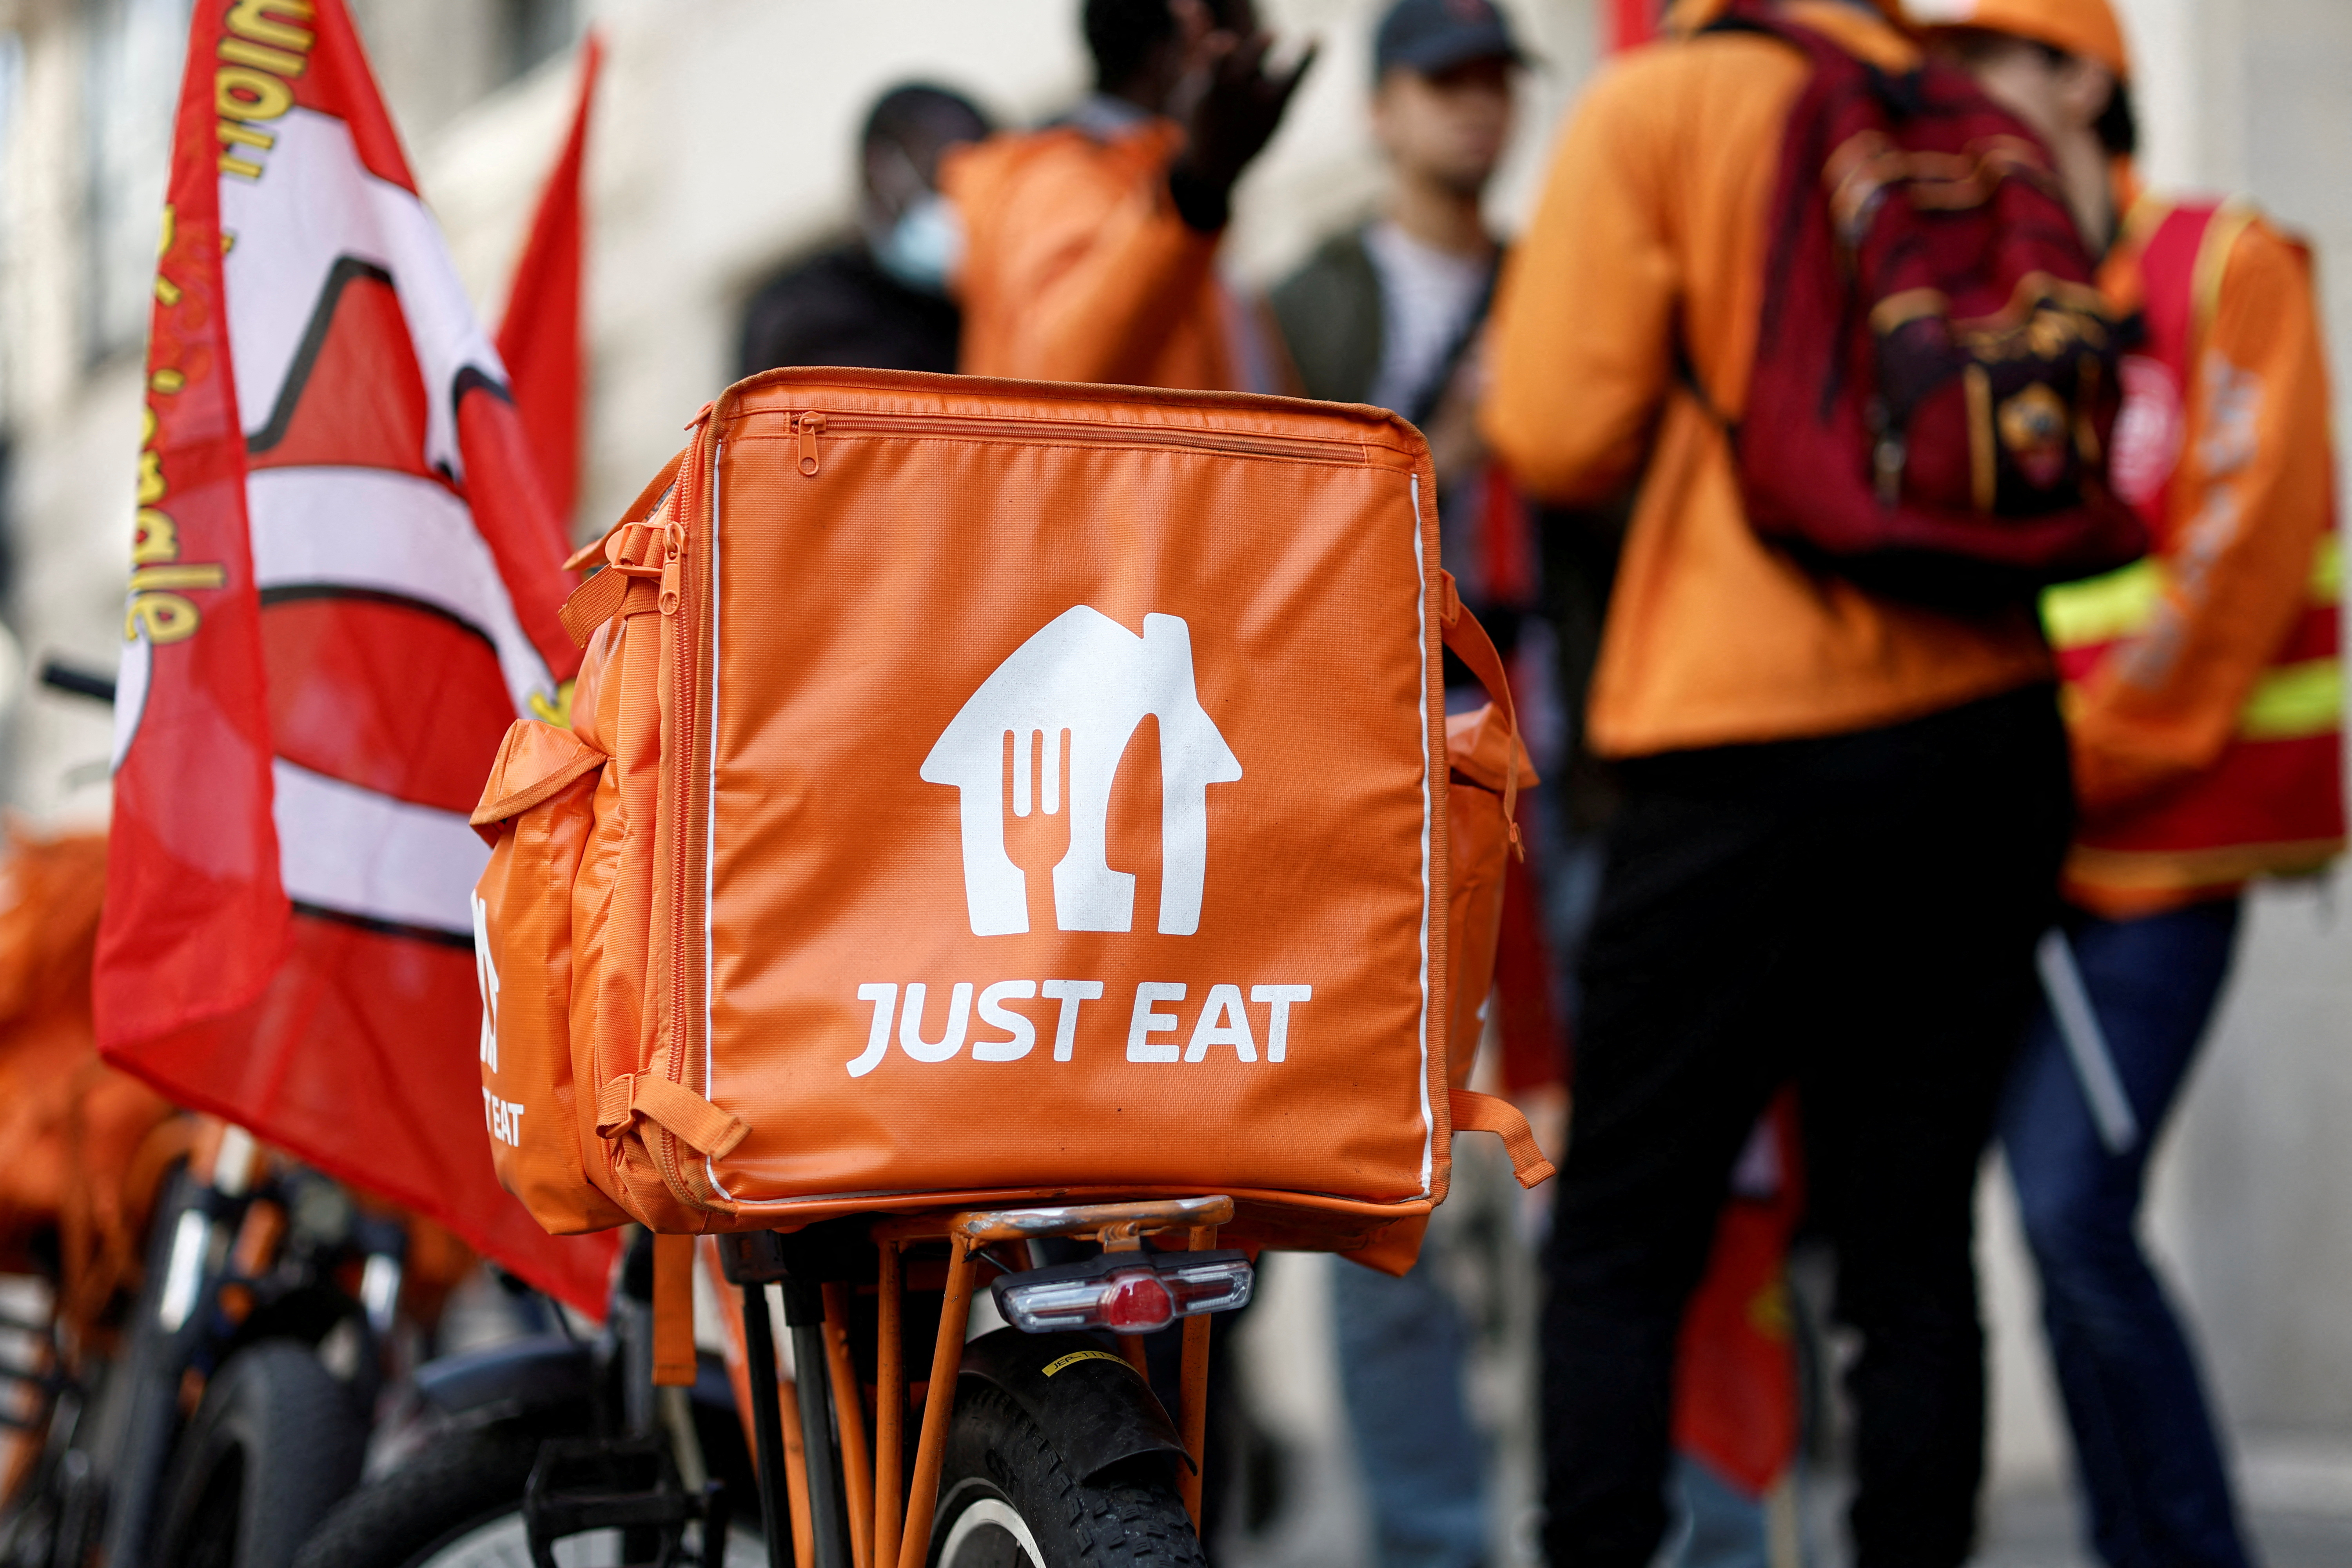 A Just Eat delivery bicycle in Paris, France, October 22, 2022